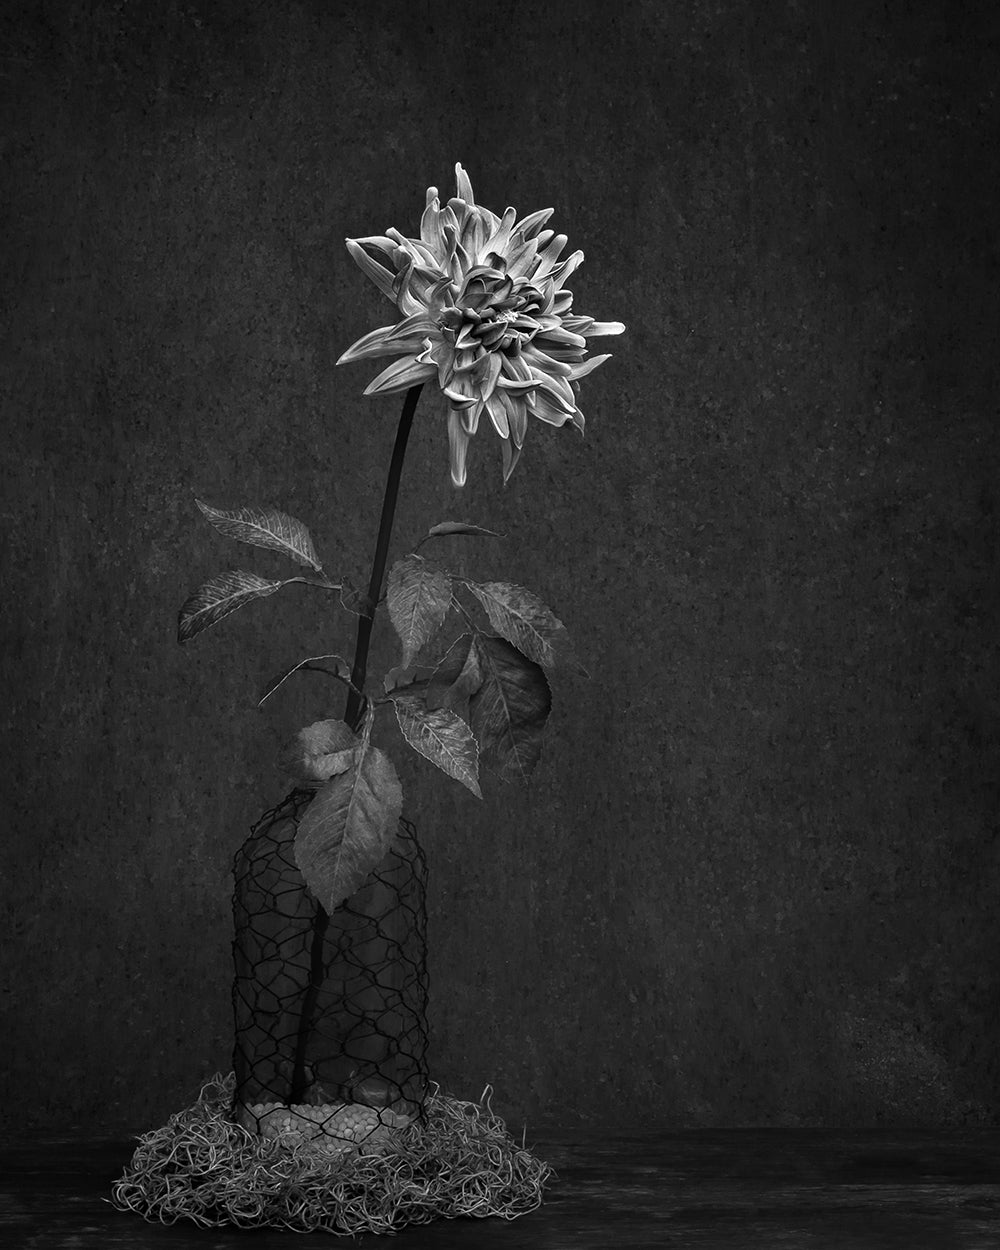 flower in a net-covered vase placed in front of a dark background